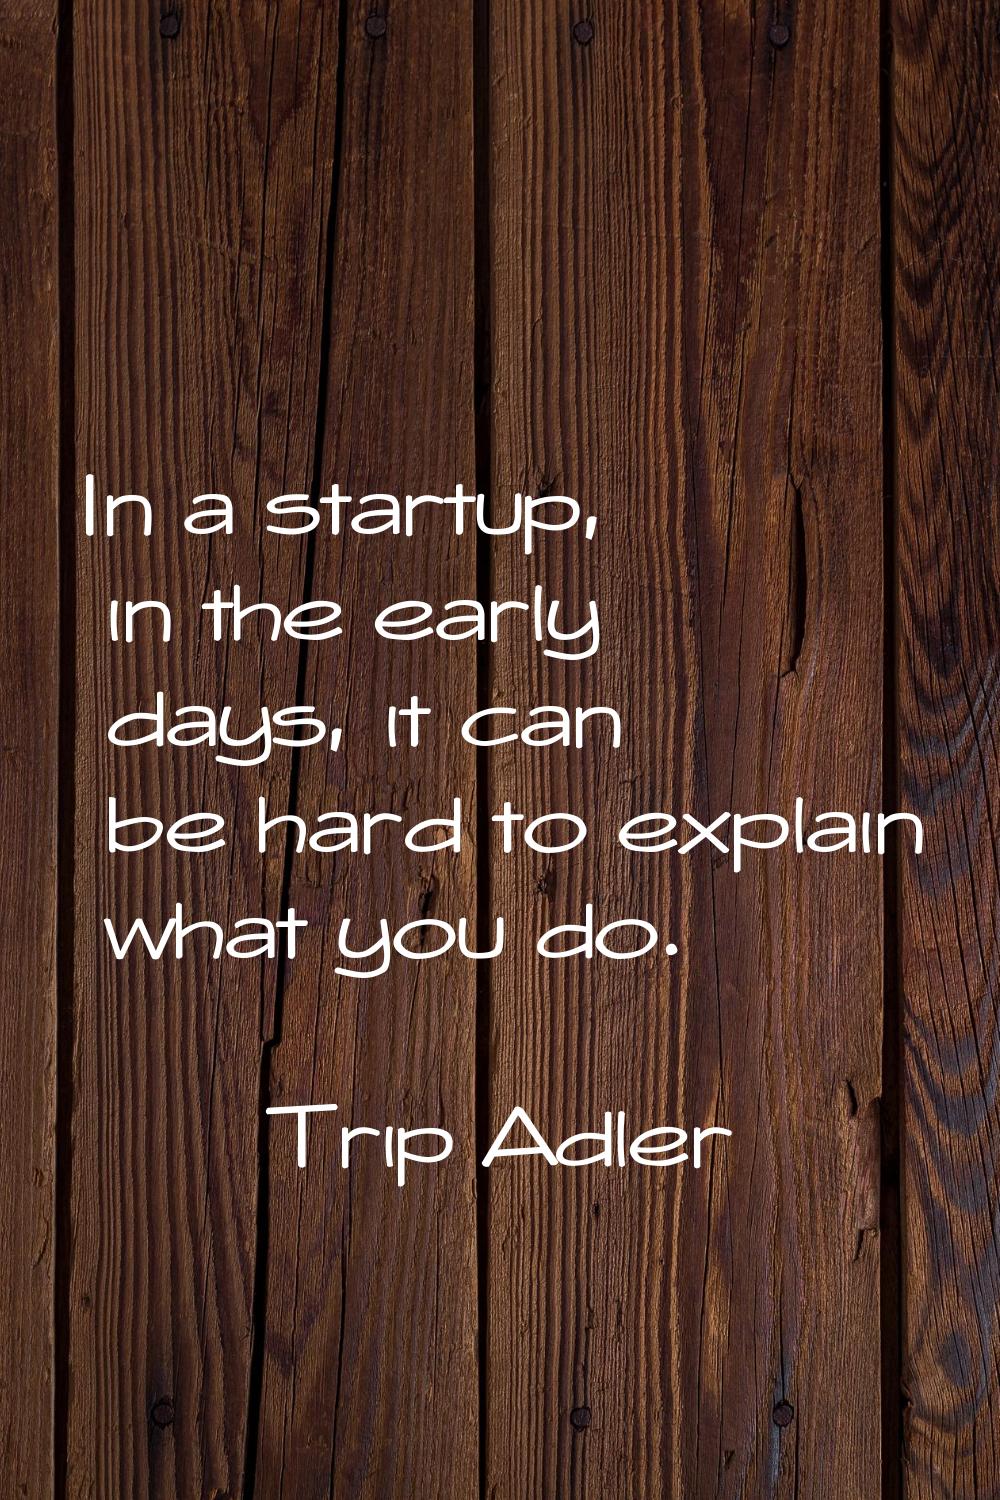 In a startup, in the early days, it can be hard to explain what you do.